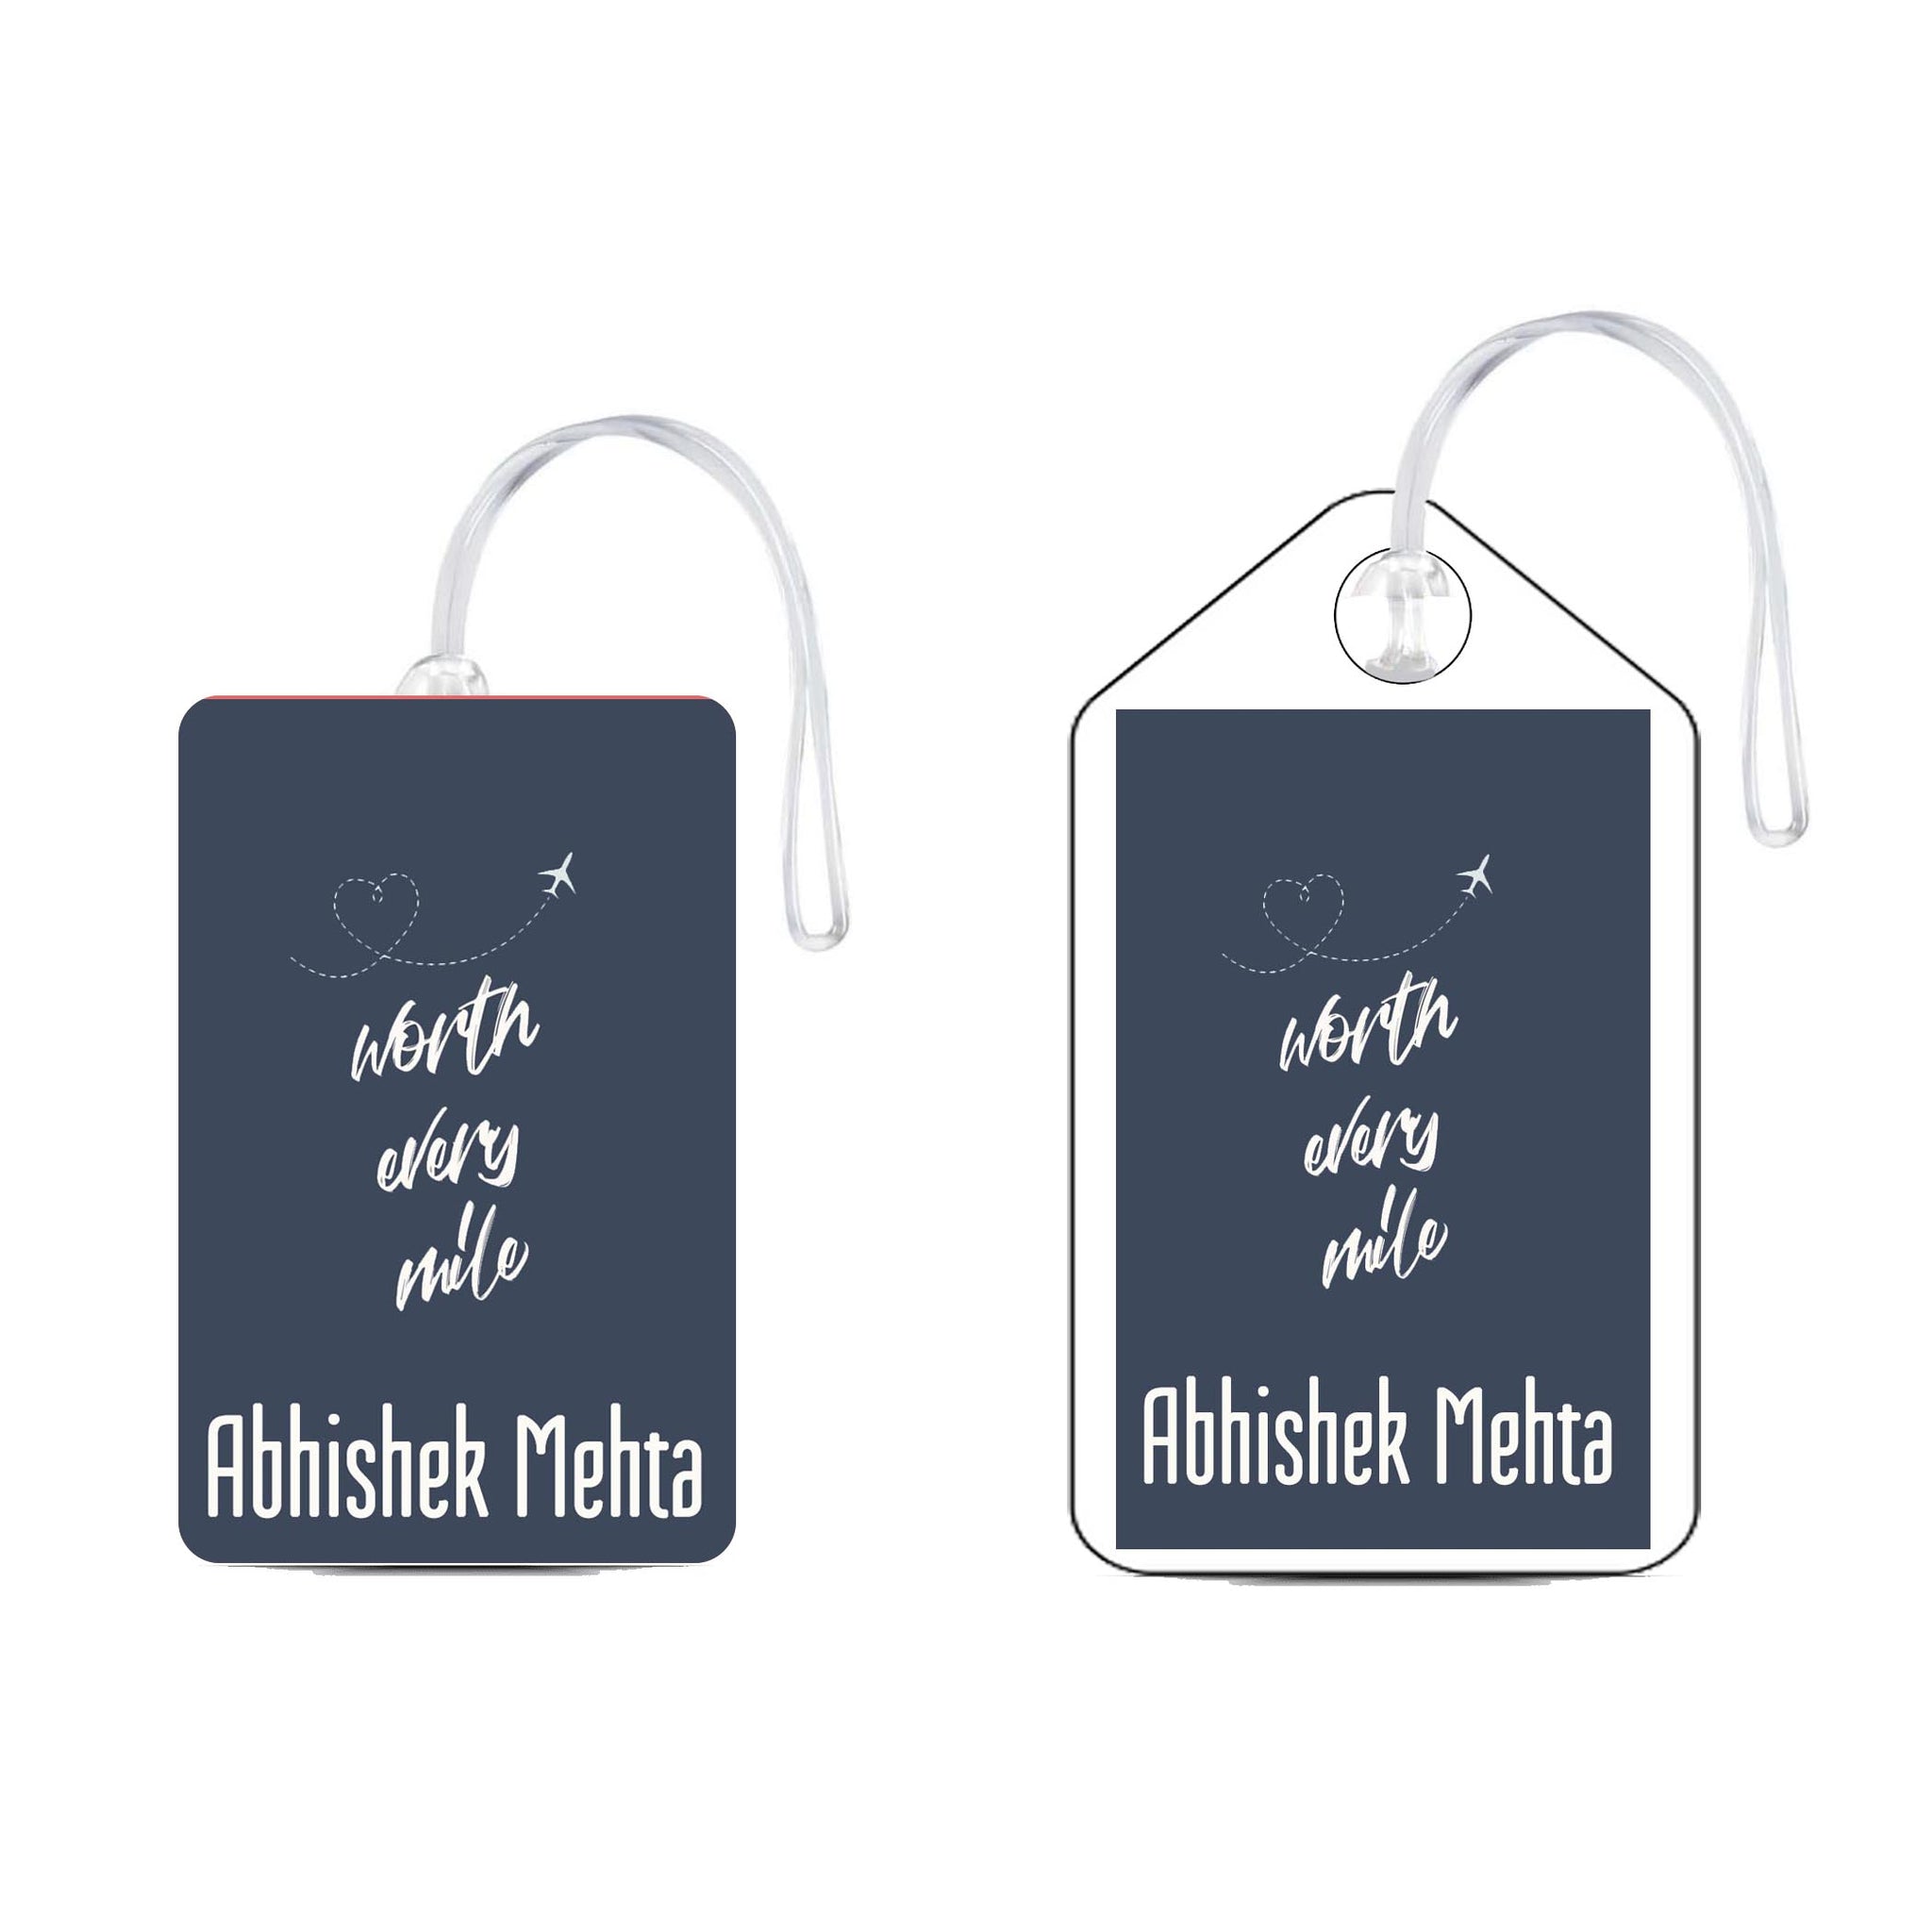 Set of 5 - Worth It Design - Luggage Tags Chatterbox Labels